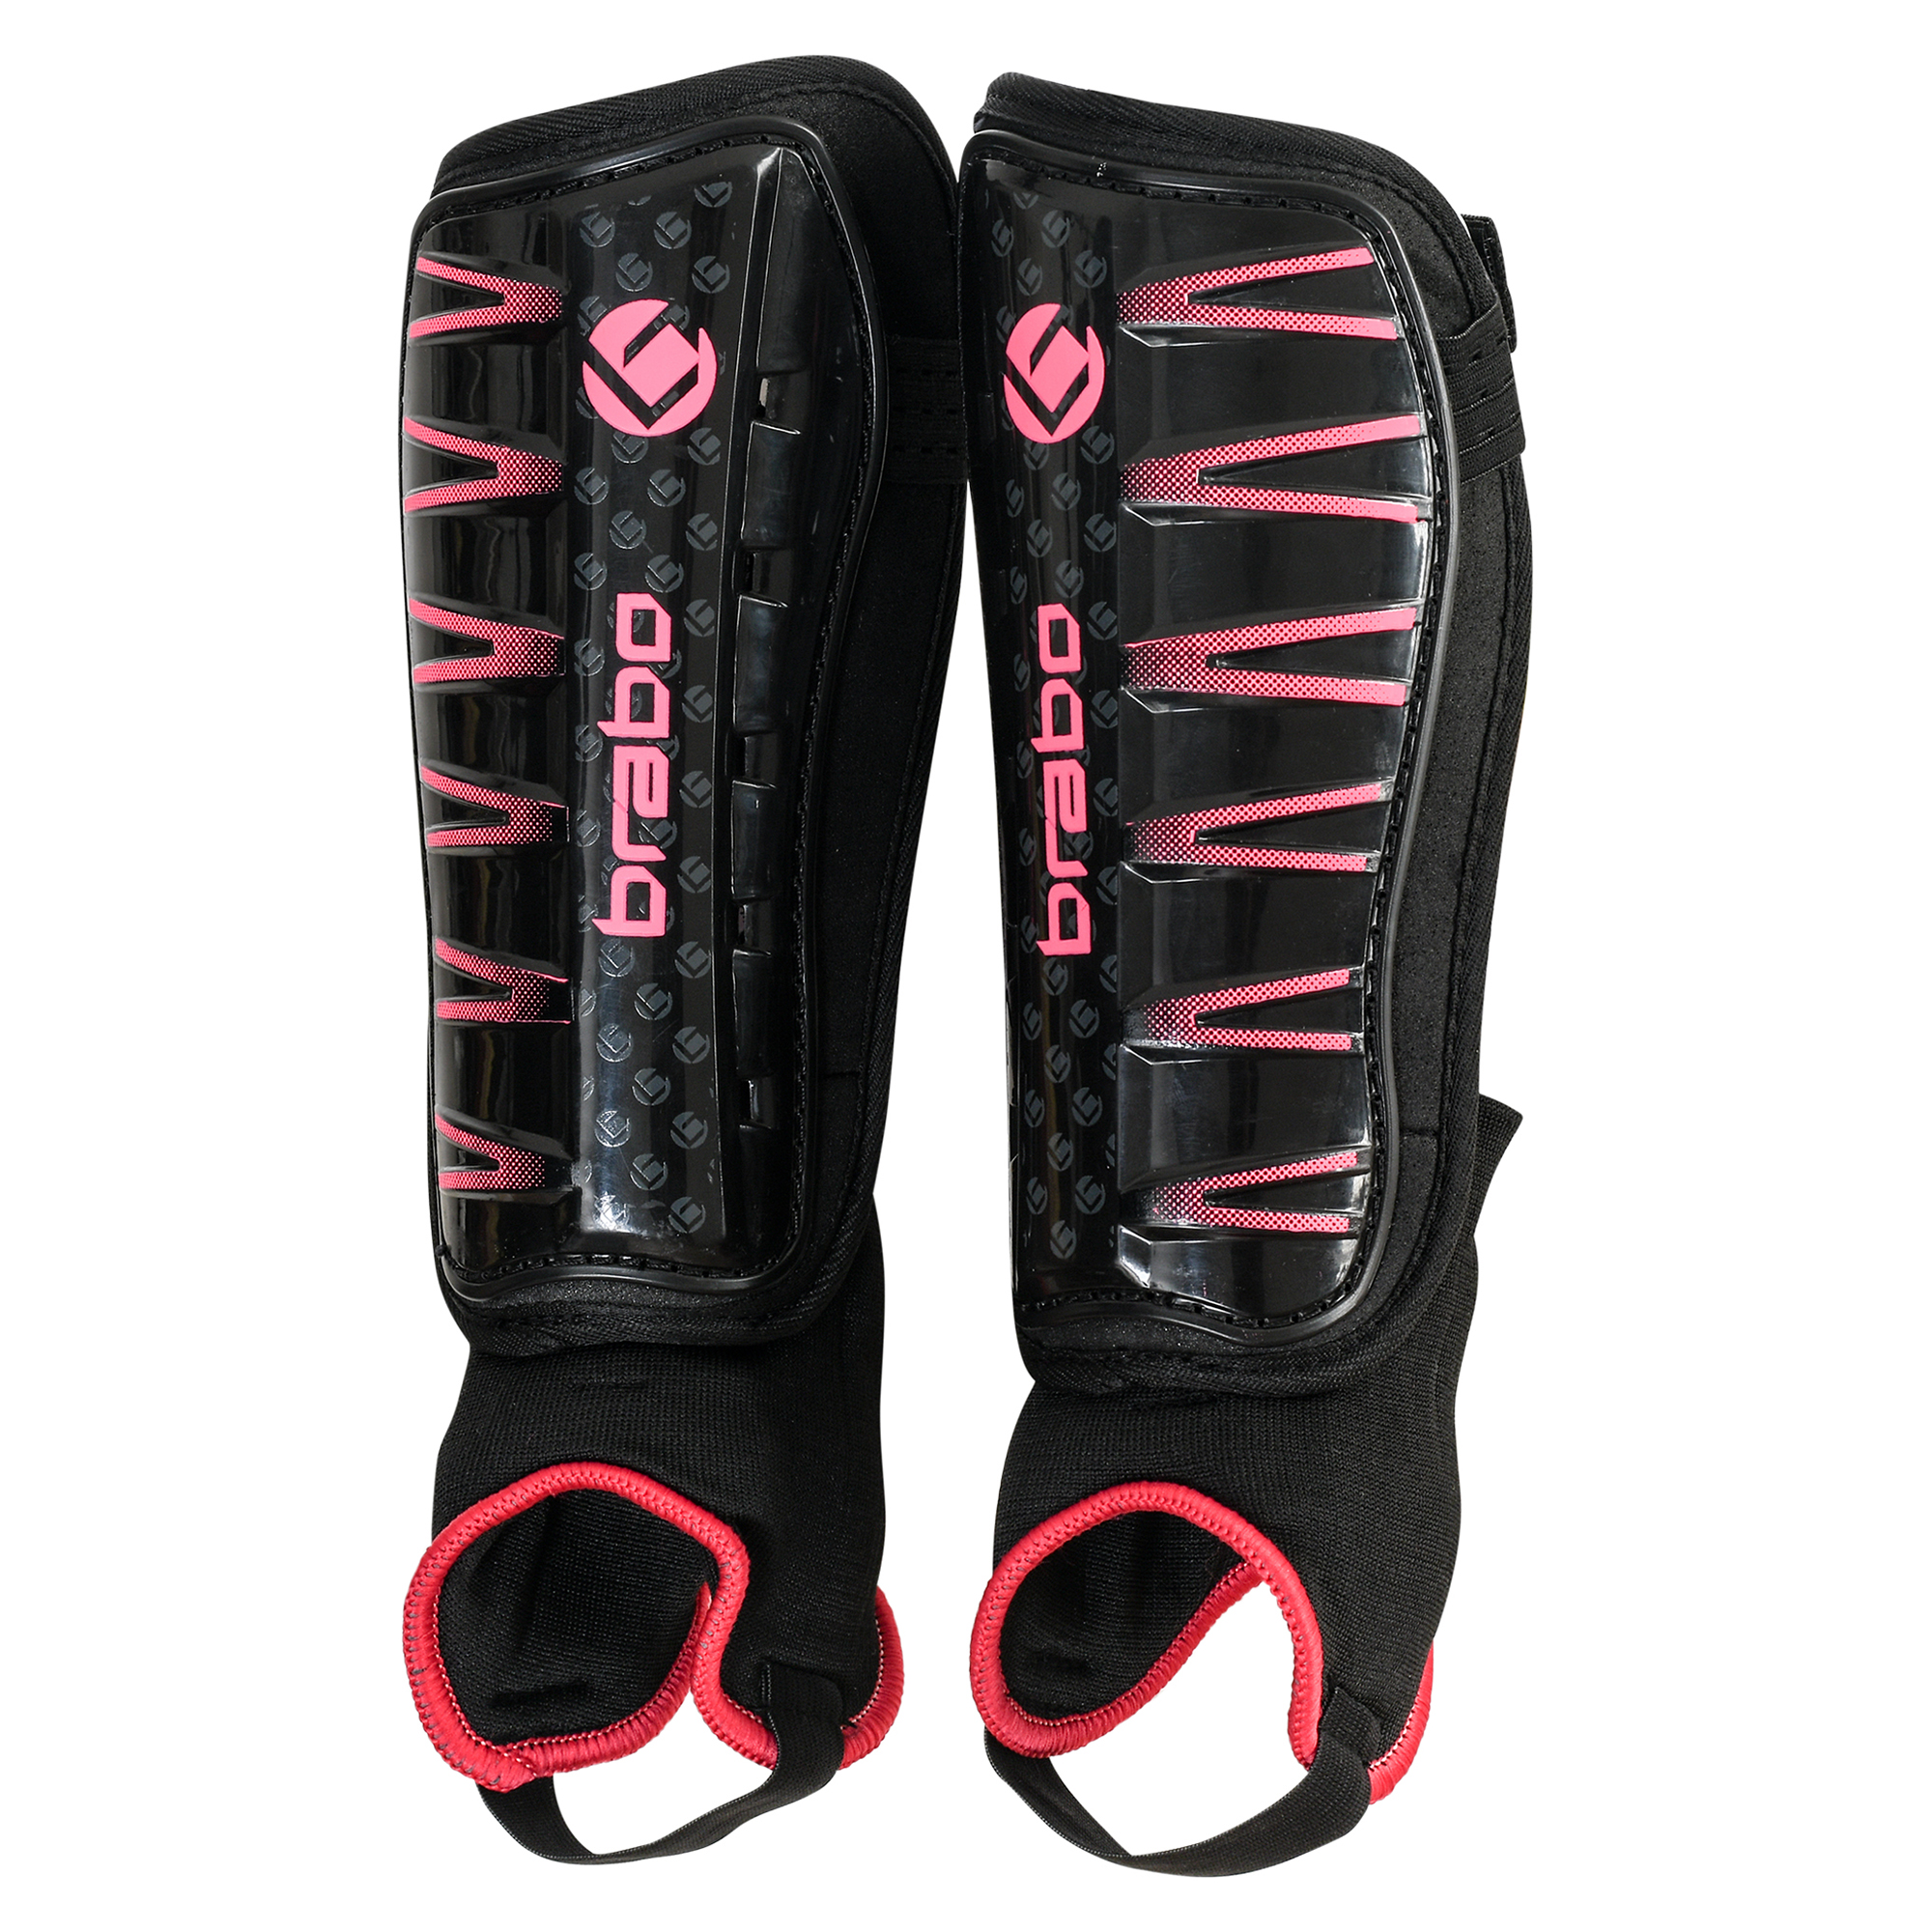 Shinguard F4 with Anklesock